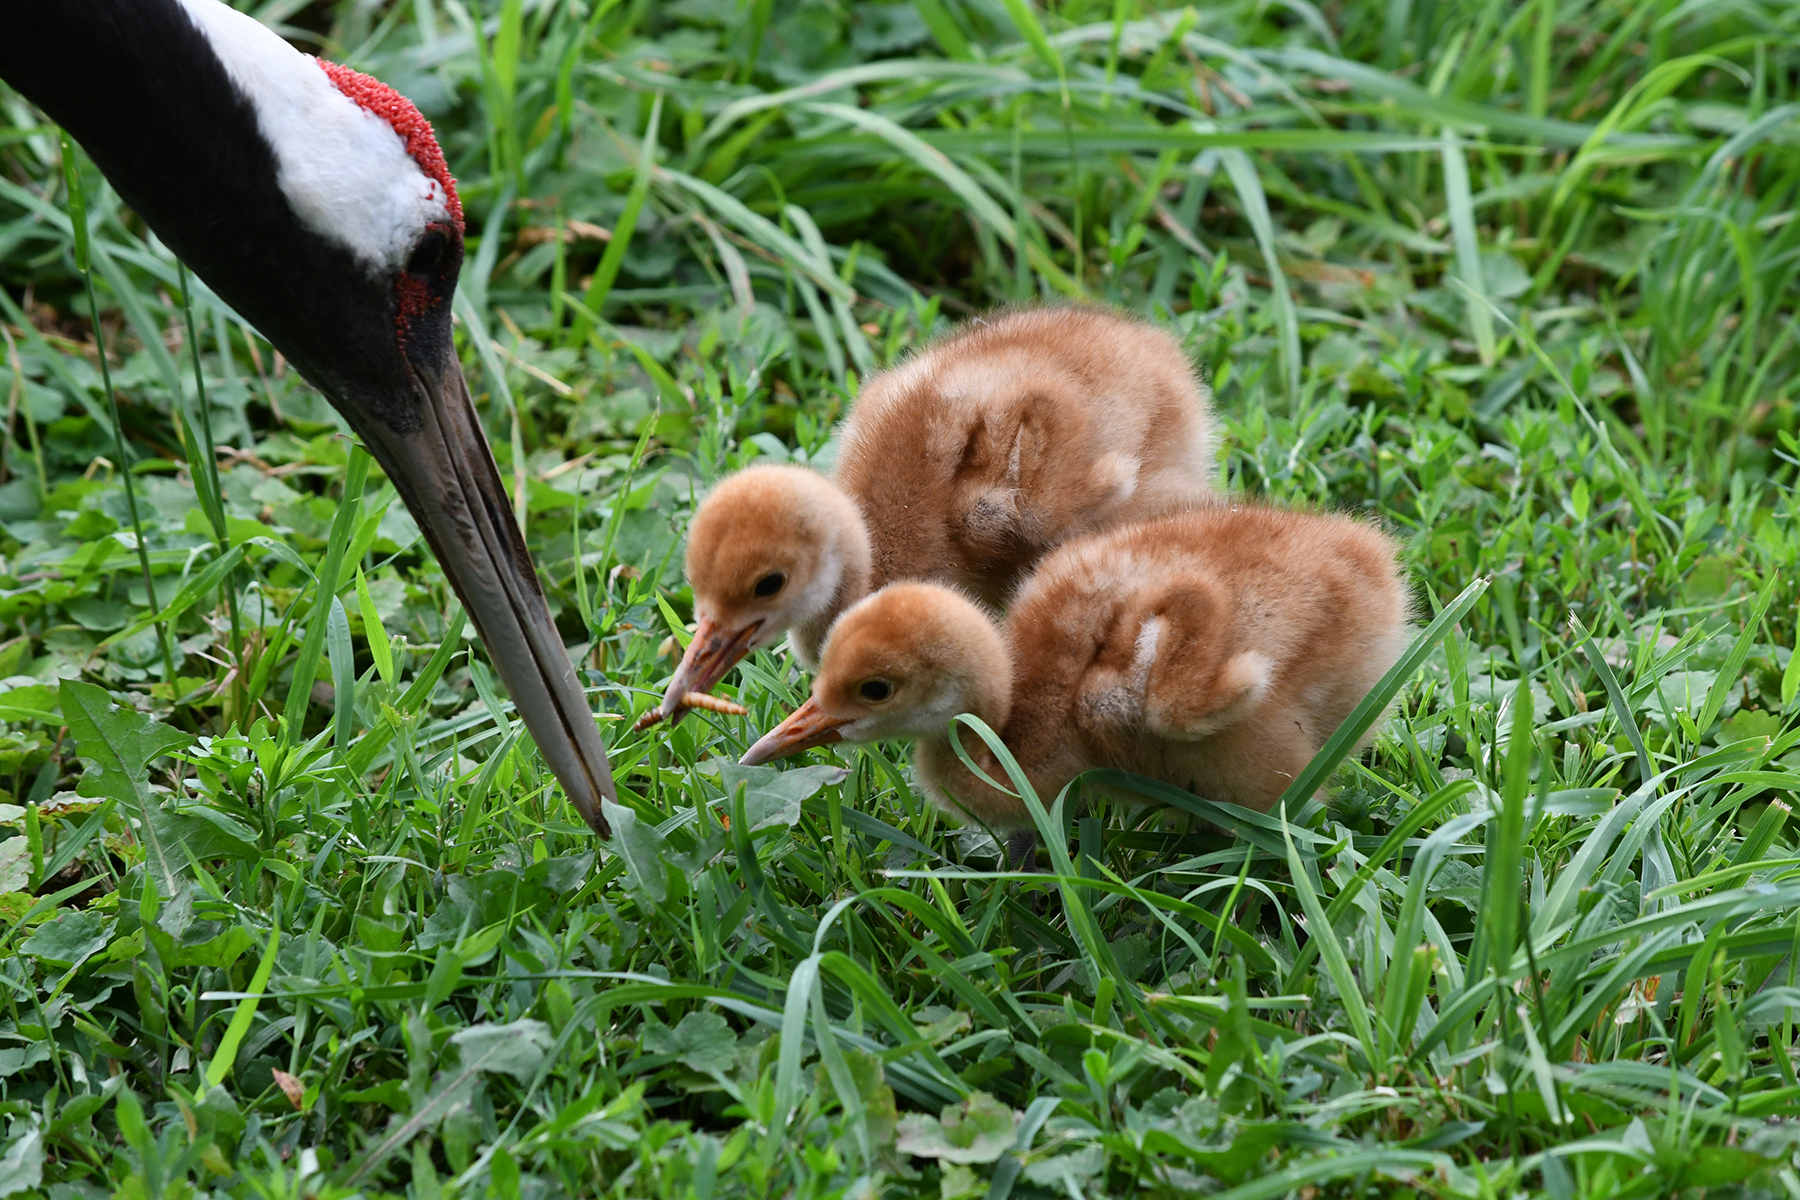 These two red-crowned crane chicks are the third and fourth offspring for their parents, Tara and Prince.